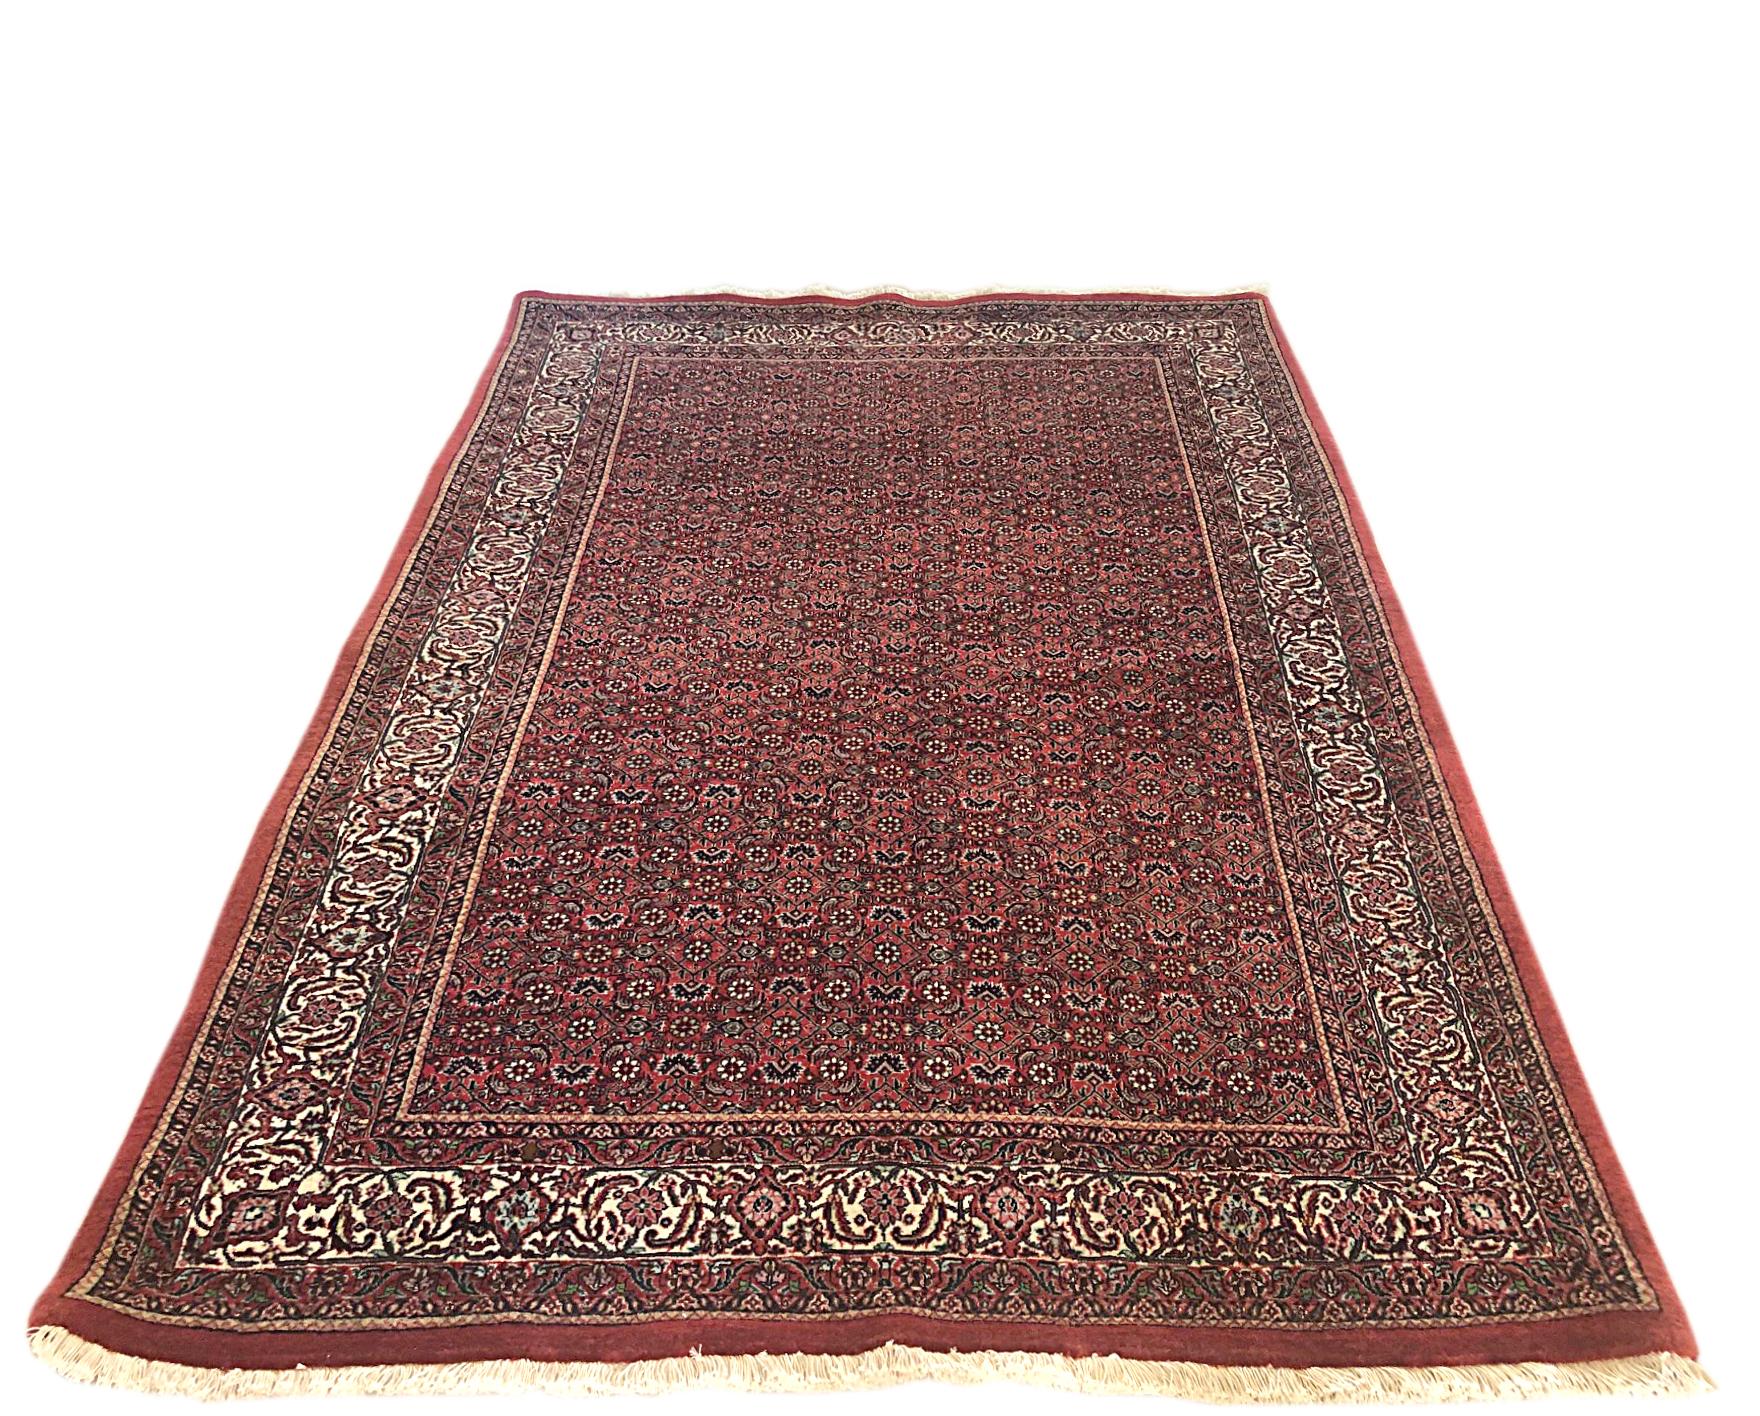 This piece is a handmade Persian Bijar rug. The pile is wool and silk with cotton foundation. The base color is red, with cream border. Bijar rugs are well-known for their craftsmanship and design. The pile is incredibly dense and strong, leading to